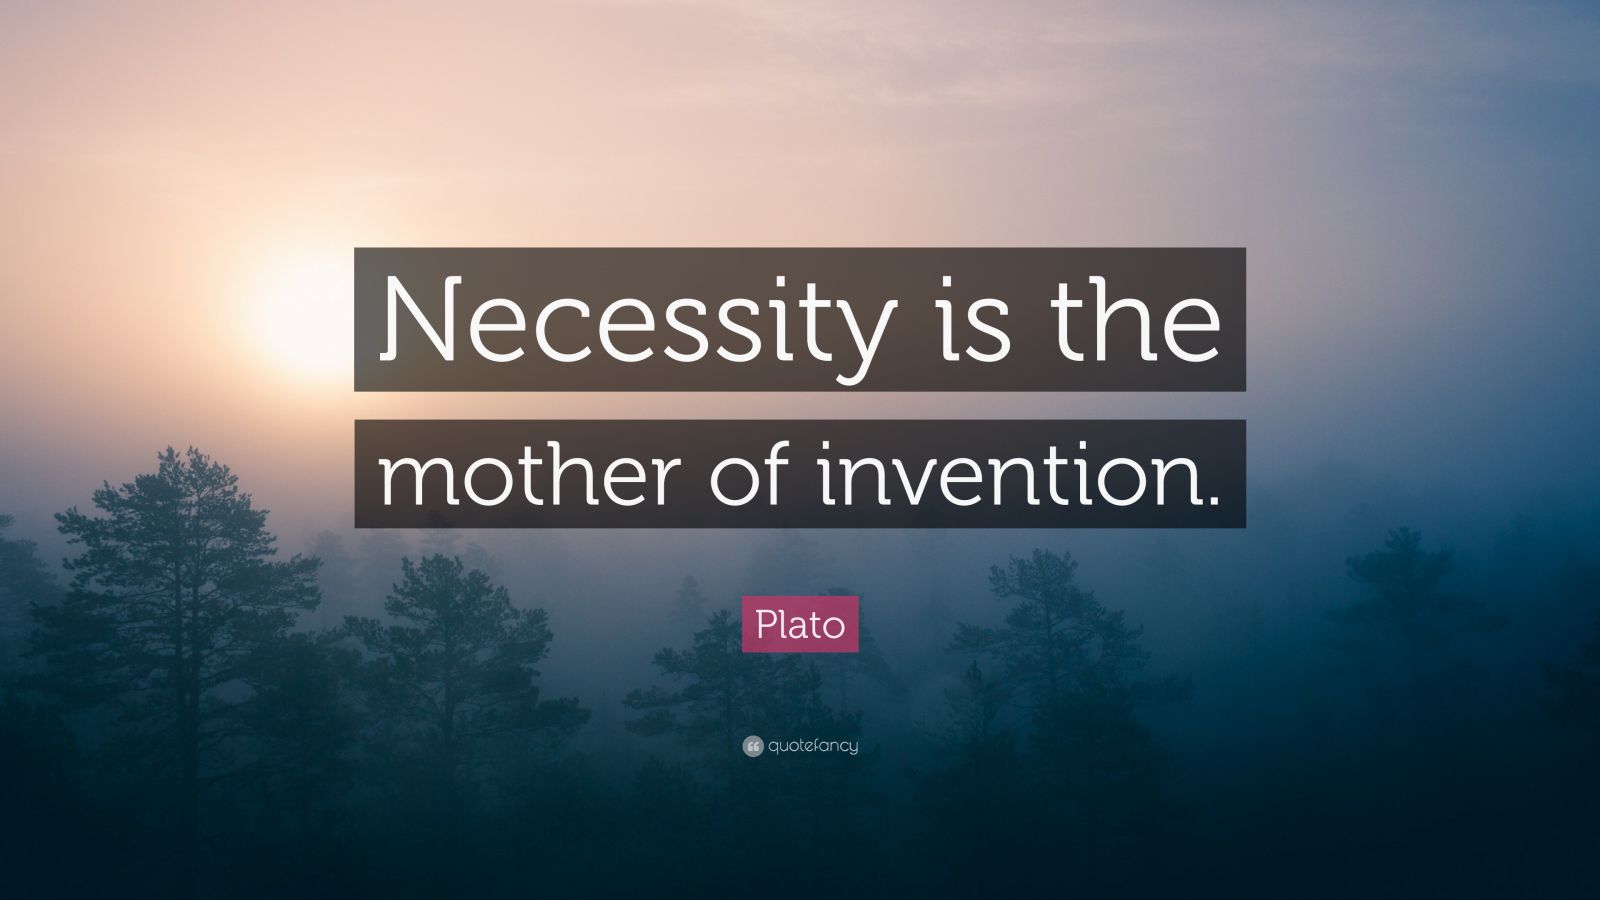 Plato Quote: “Necessity is the mother of invention.” (12 wallpapers